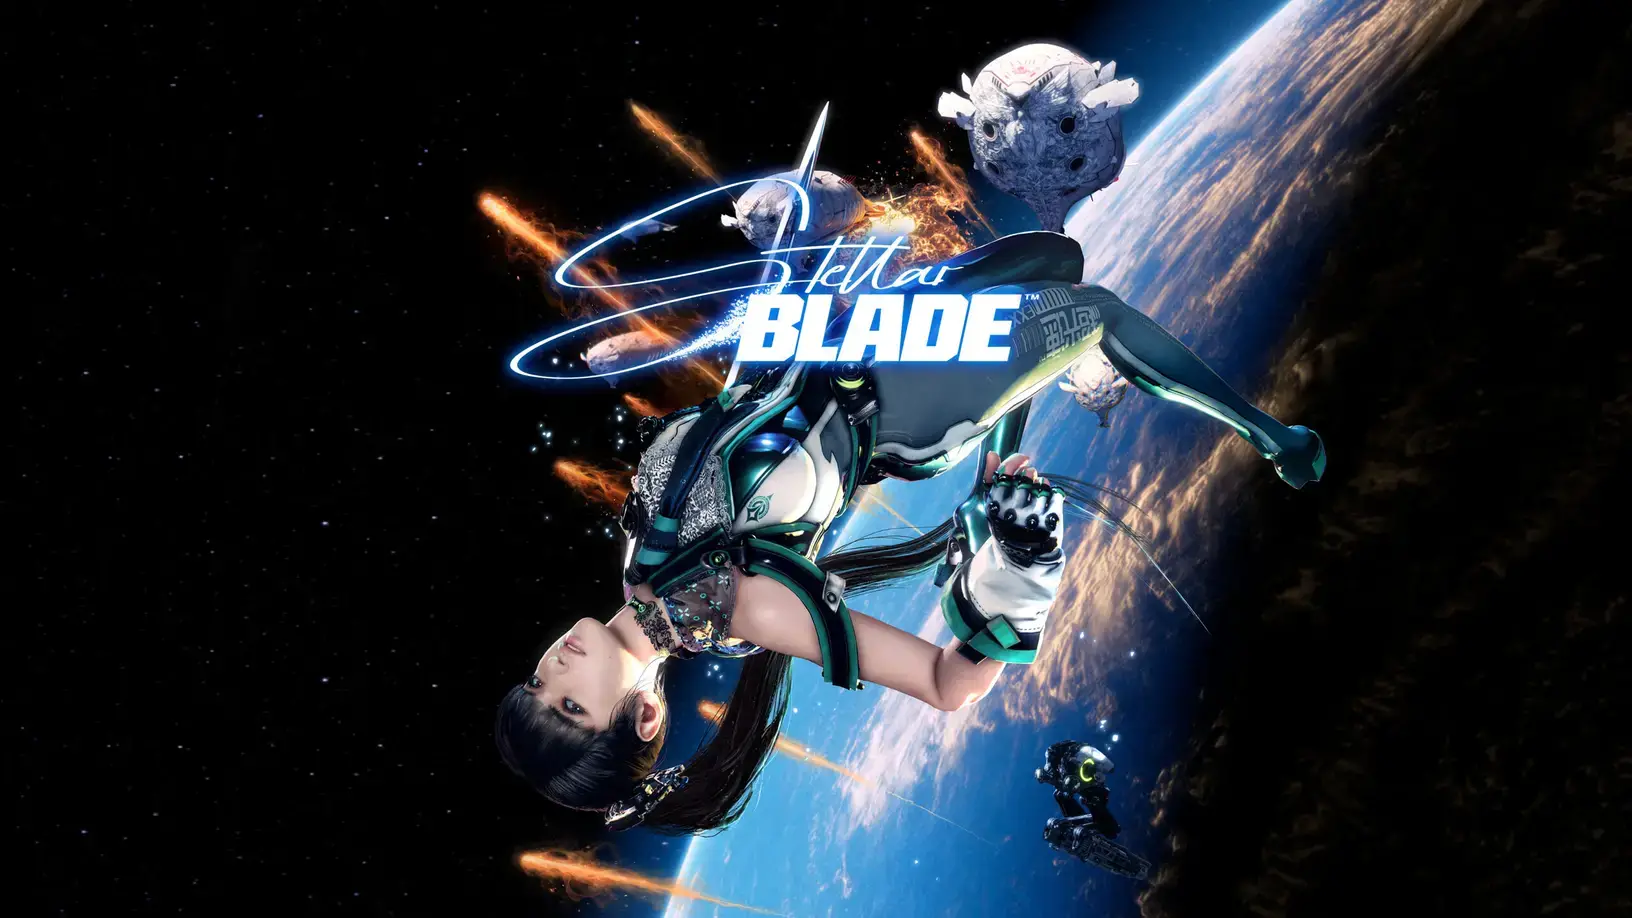 Stellar Blade Will Feature 20-30 Different Costumes for the Protagonist